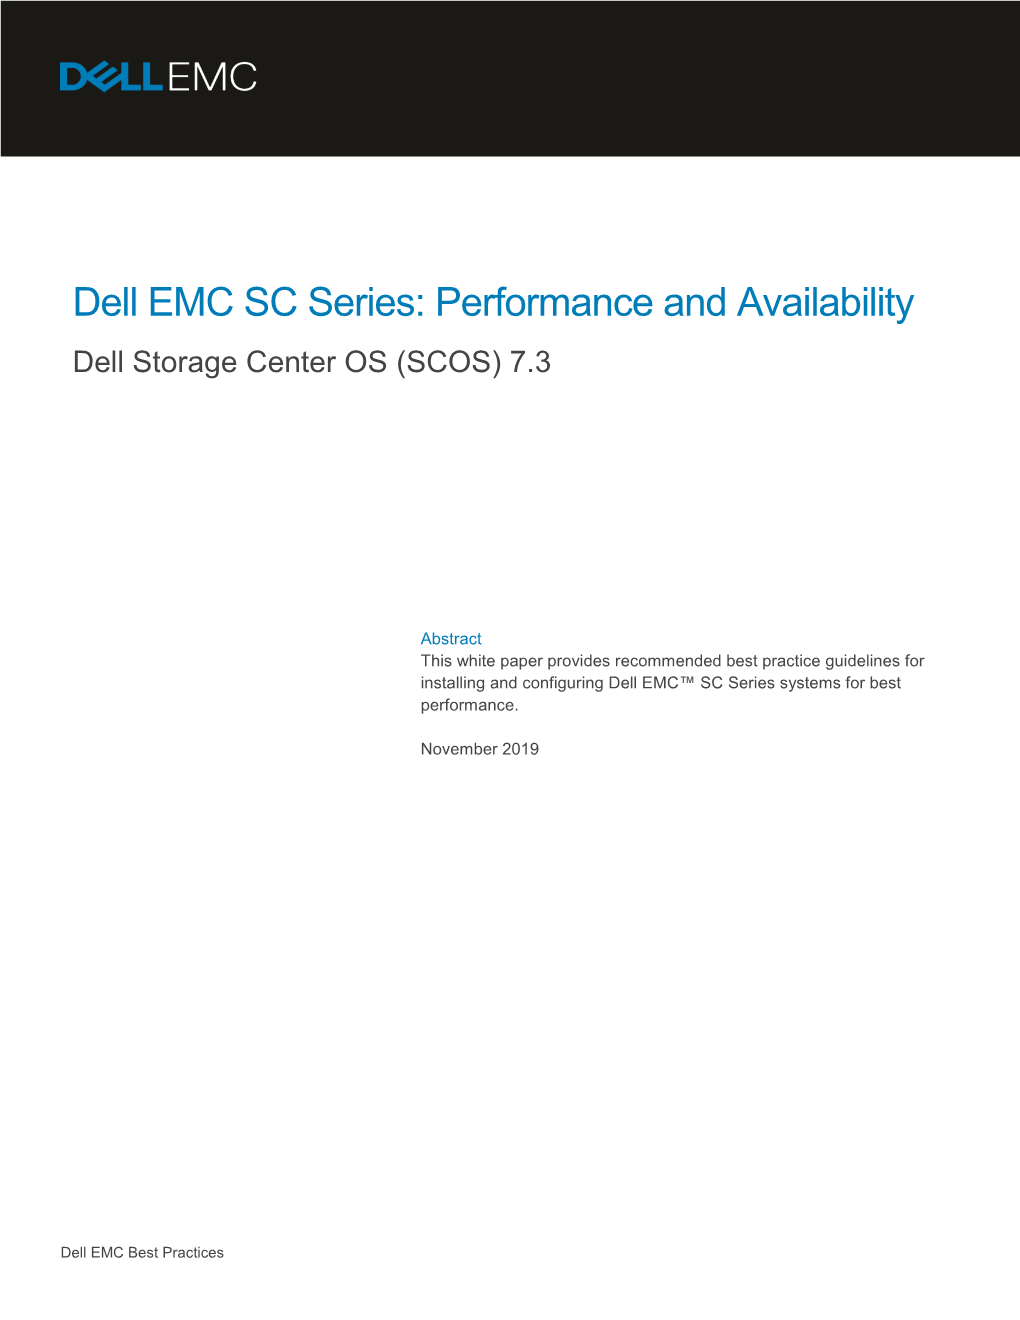 Dell EMC SC Series: Performance and Availability Dell Storage Center OS (SCOS) 7.3